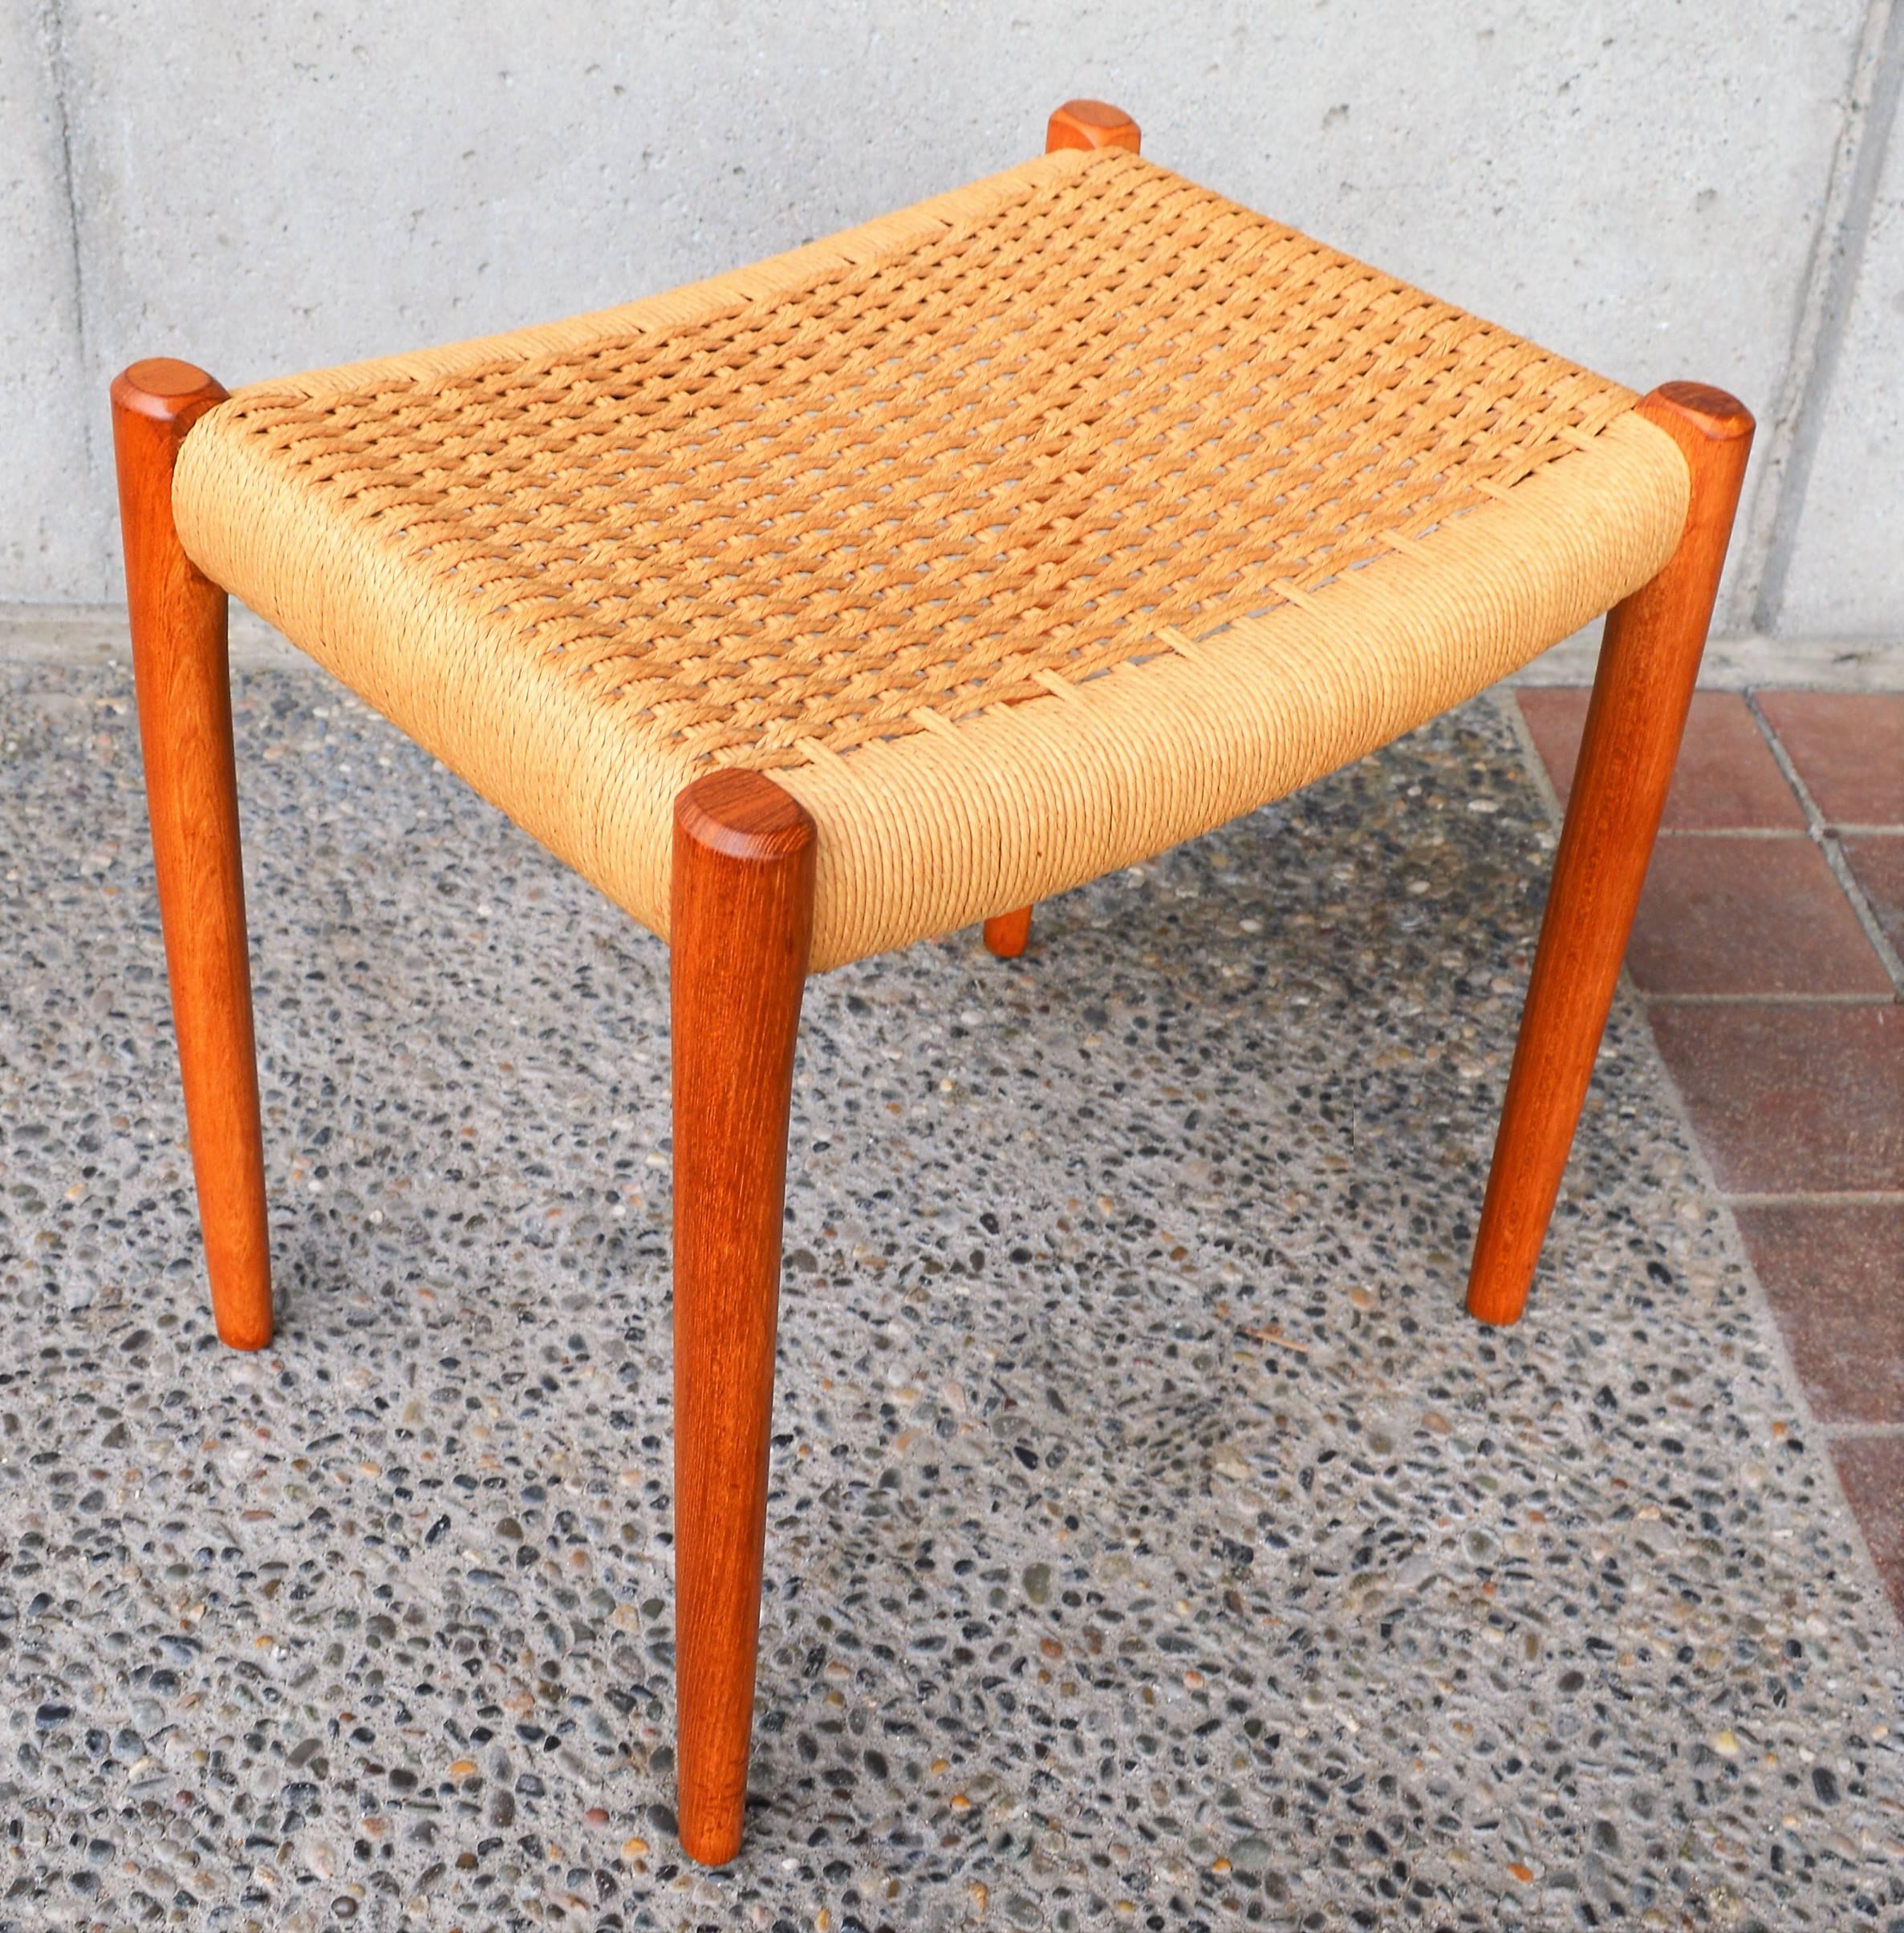 This lovely Danish modern teak stool or ottoman by Niels Otto Møller for J.L. Moller is in absolutely amazing original condition. With solid teak sculptured and tapering legs with beautiful grain, and the original basket weave Classic Danish